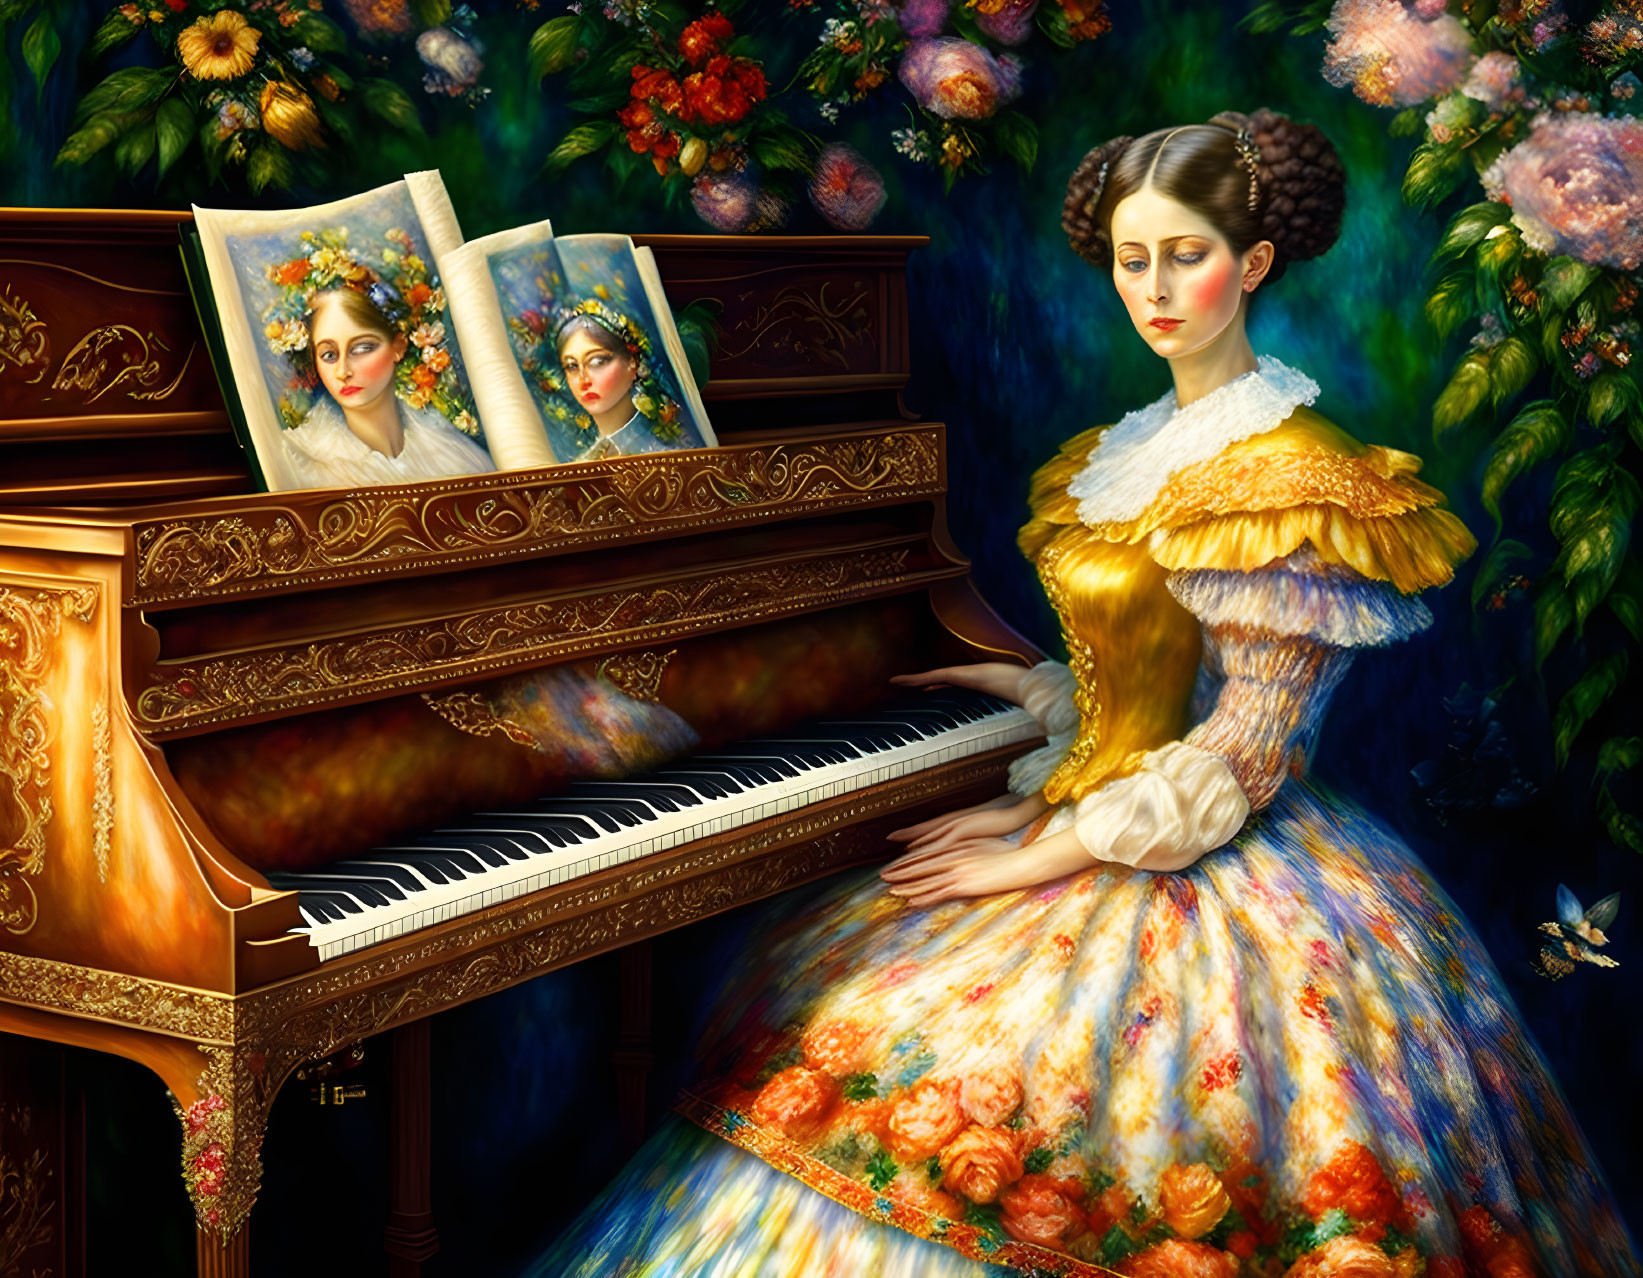 Woman in vibrant floral dress at grand piano with artwork, flowers, and butterflies